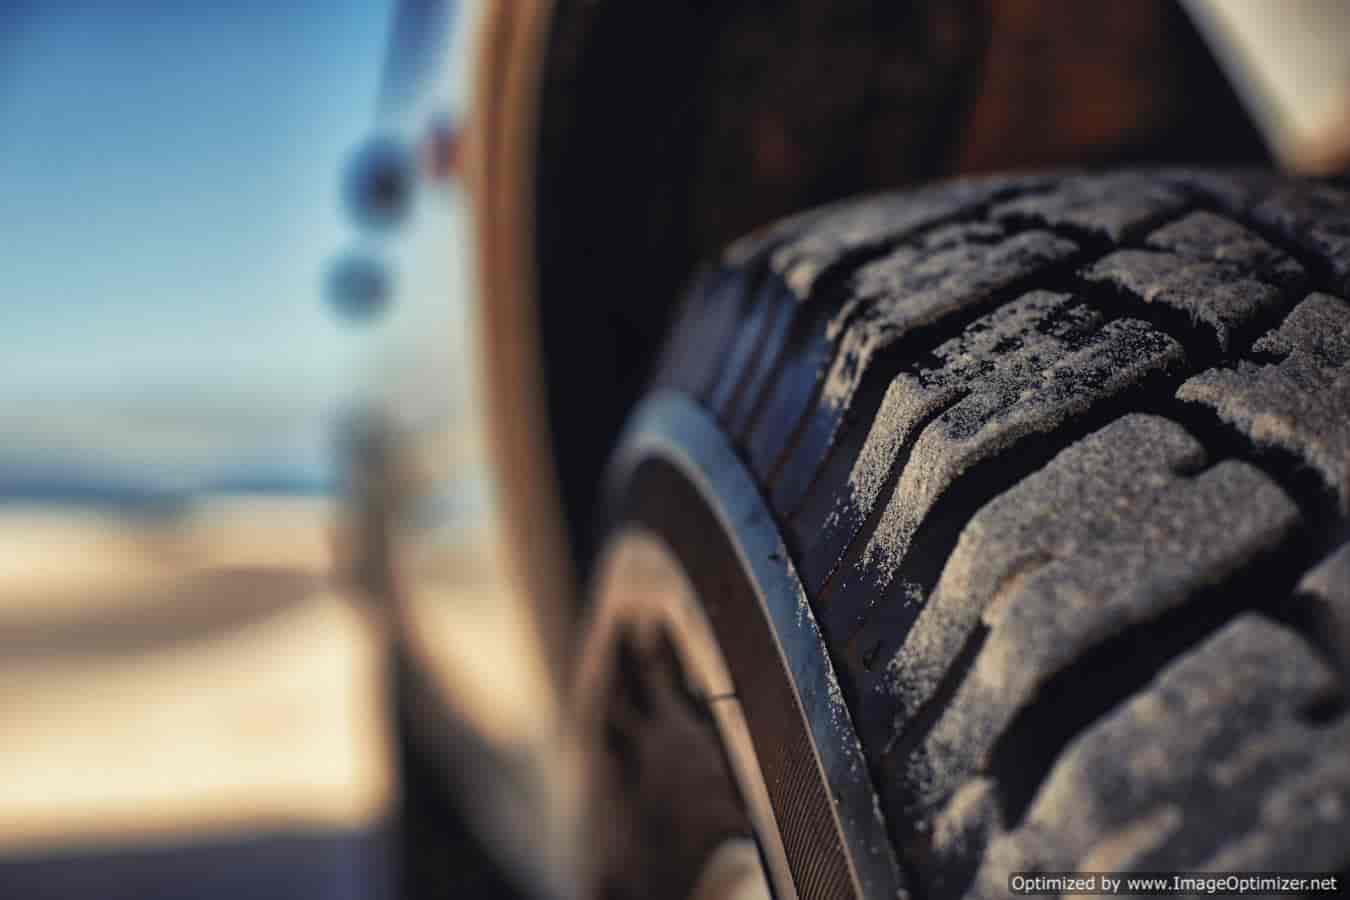 Top 4 Myths Vs Facts About Using Nitrogen To Inflate Car Tires